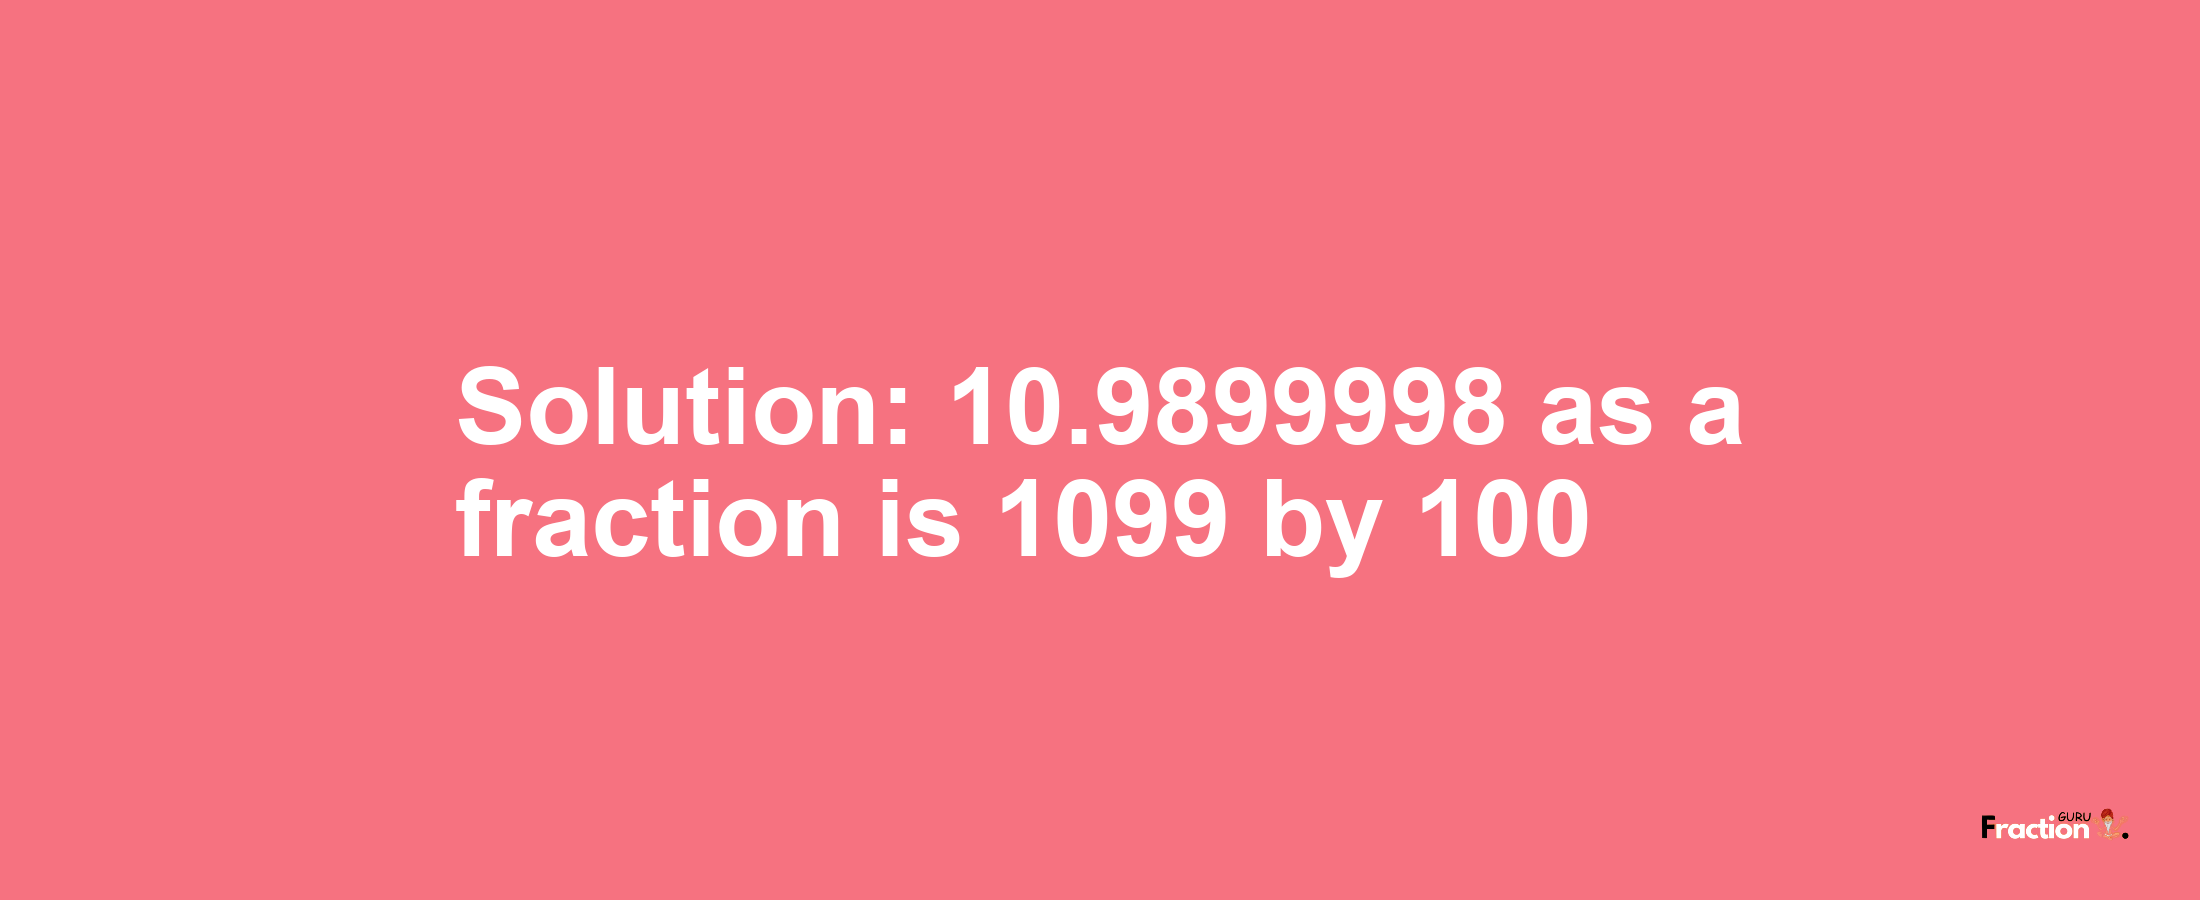 Solution:10.9899998 as a fraction is 1099/100